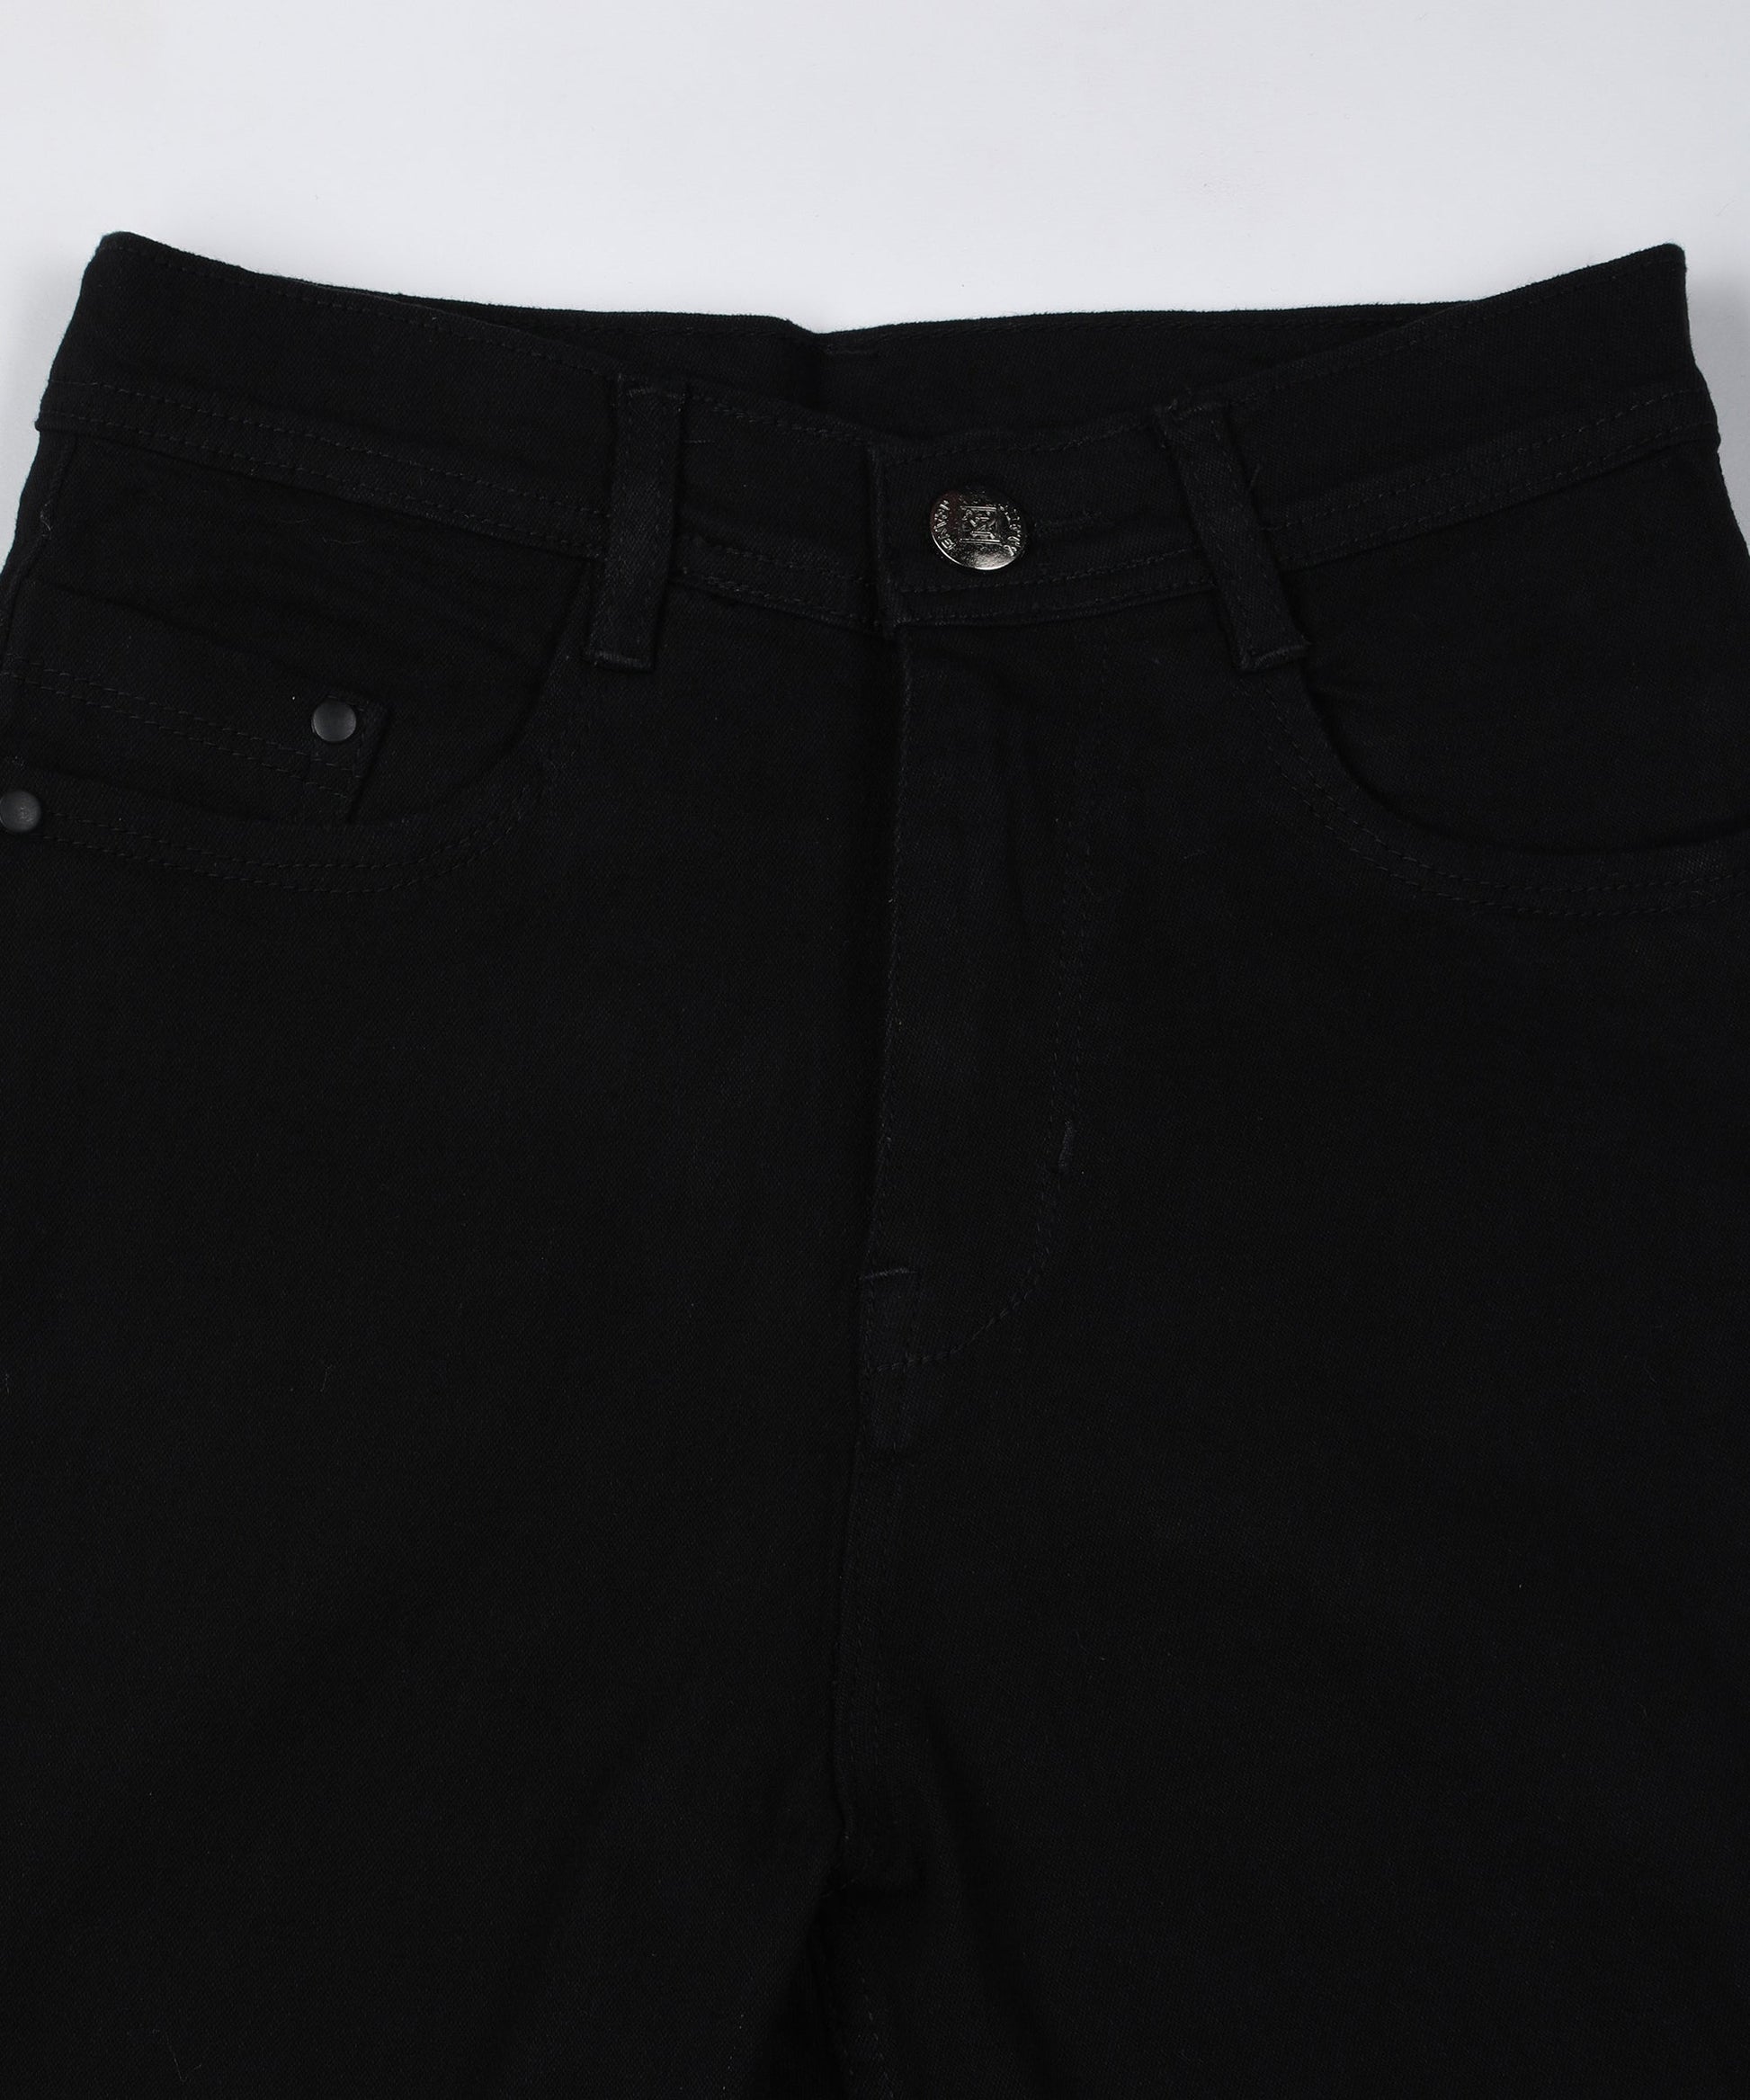 Jet black slim fit 5- pocket high rise jeans, clean look, zip fly with button closure, waistband with belt loops